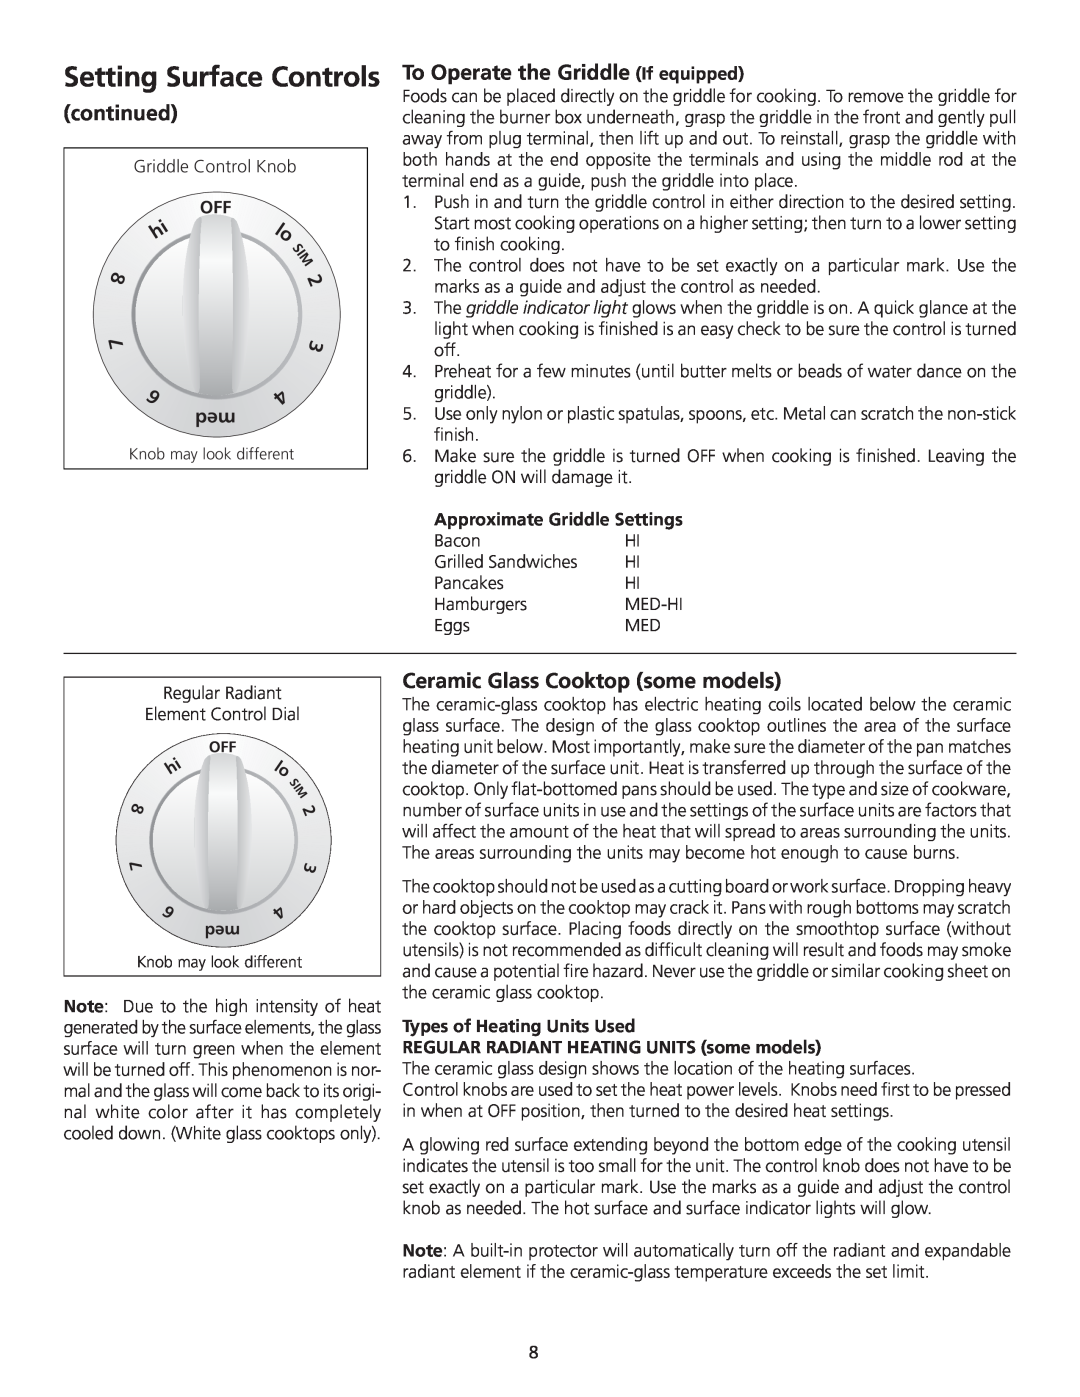 Frigidaire 318200710 important safety instructions Setting Surface Controls, continued, To Operate the Griddle If equipped 